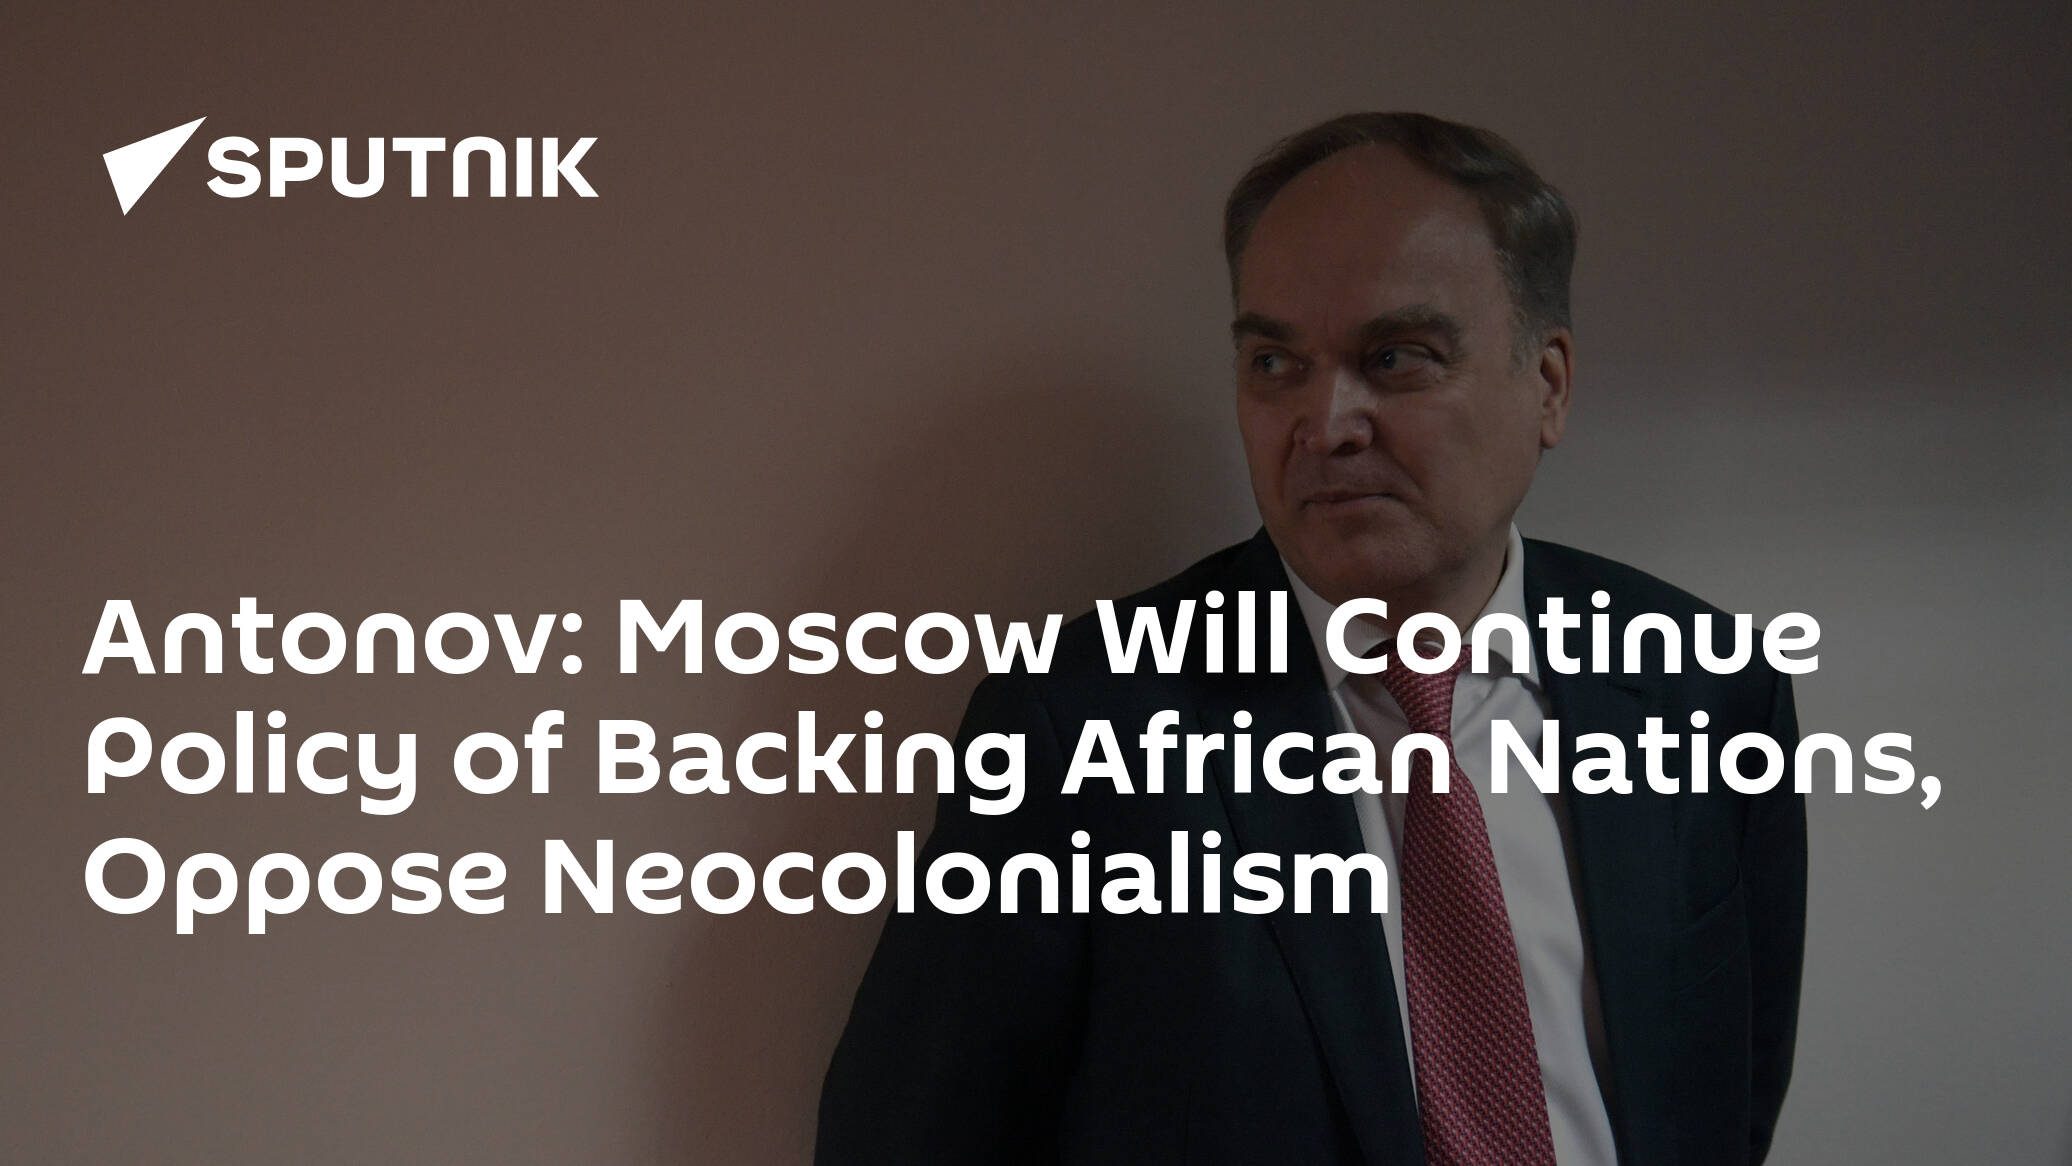 Antonov: Moscow Will Continue Policy of Backing African Nations, Oppose Neocolonialism